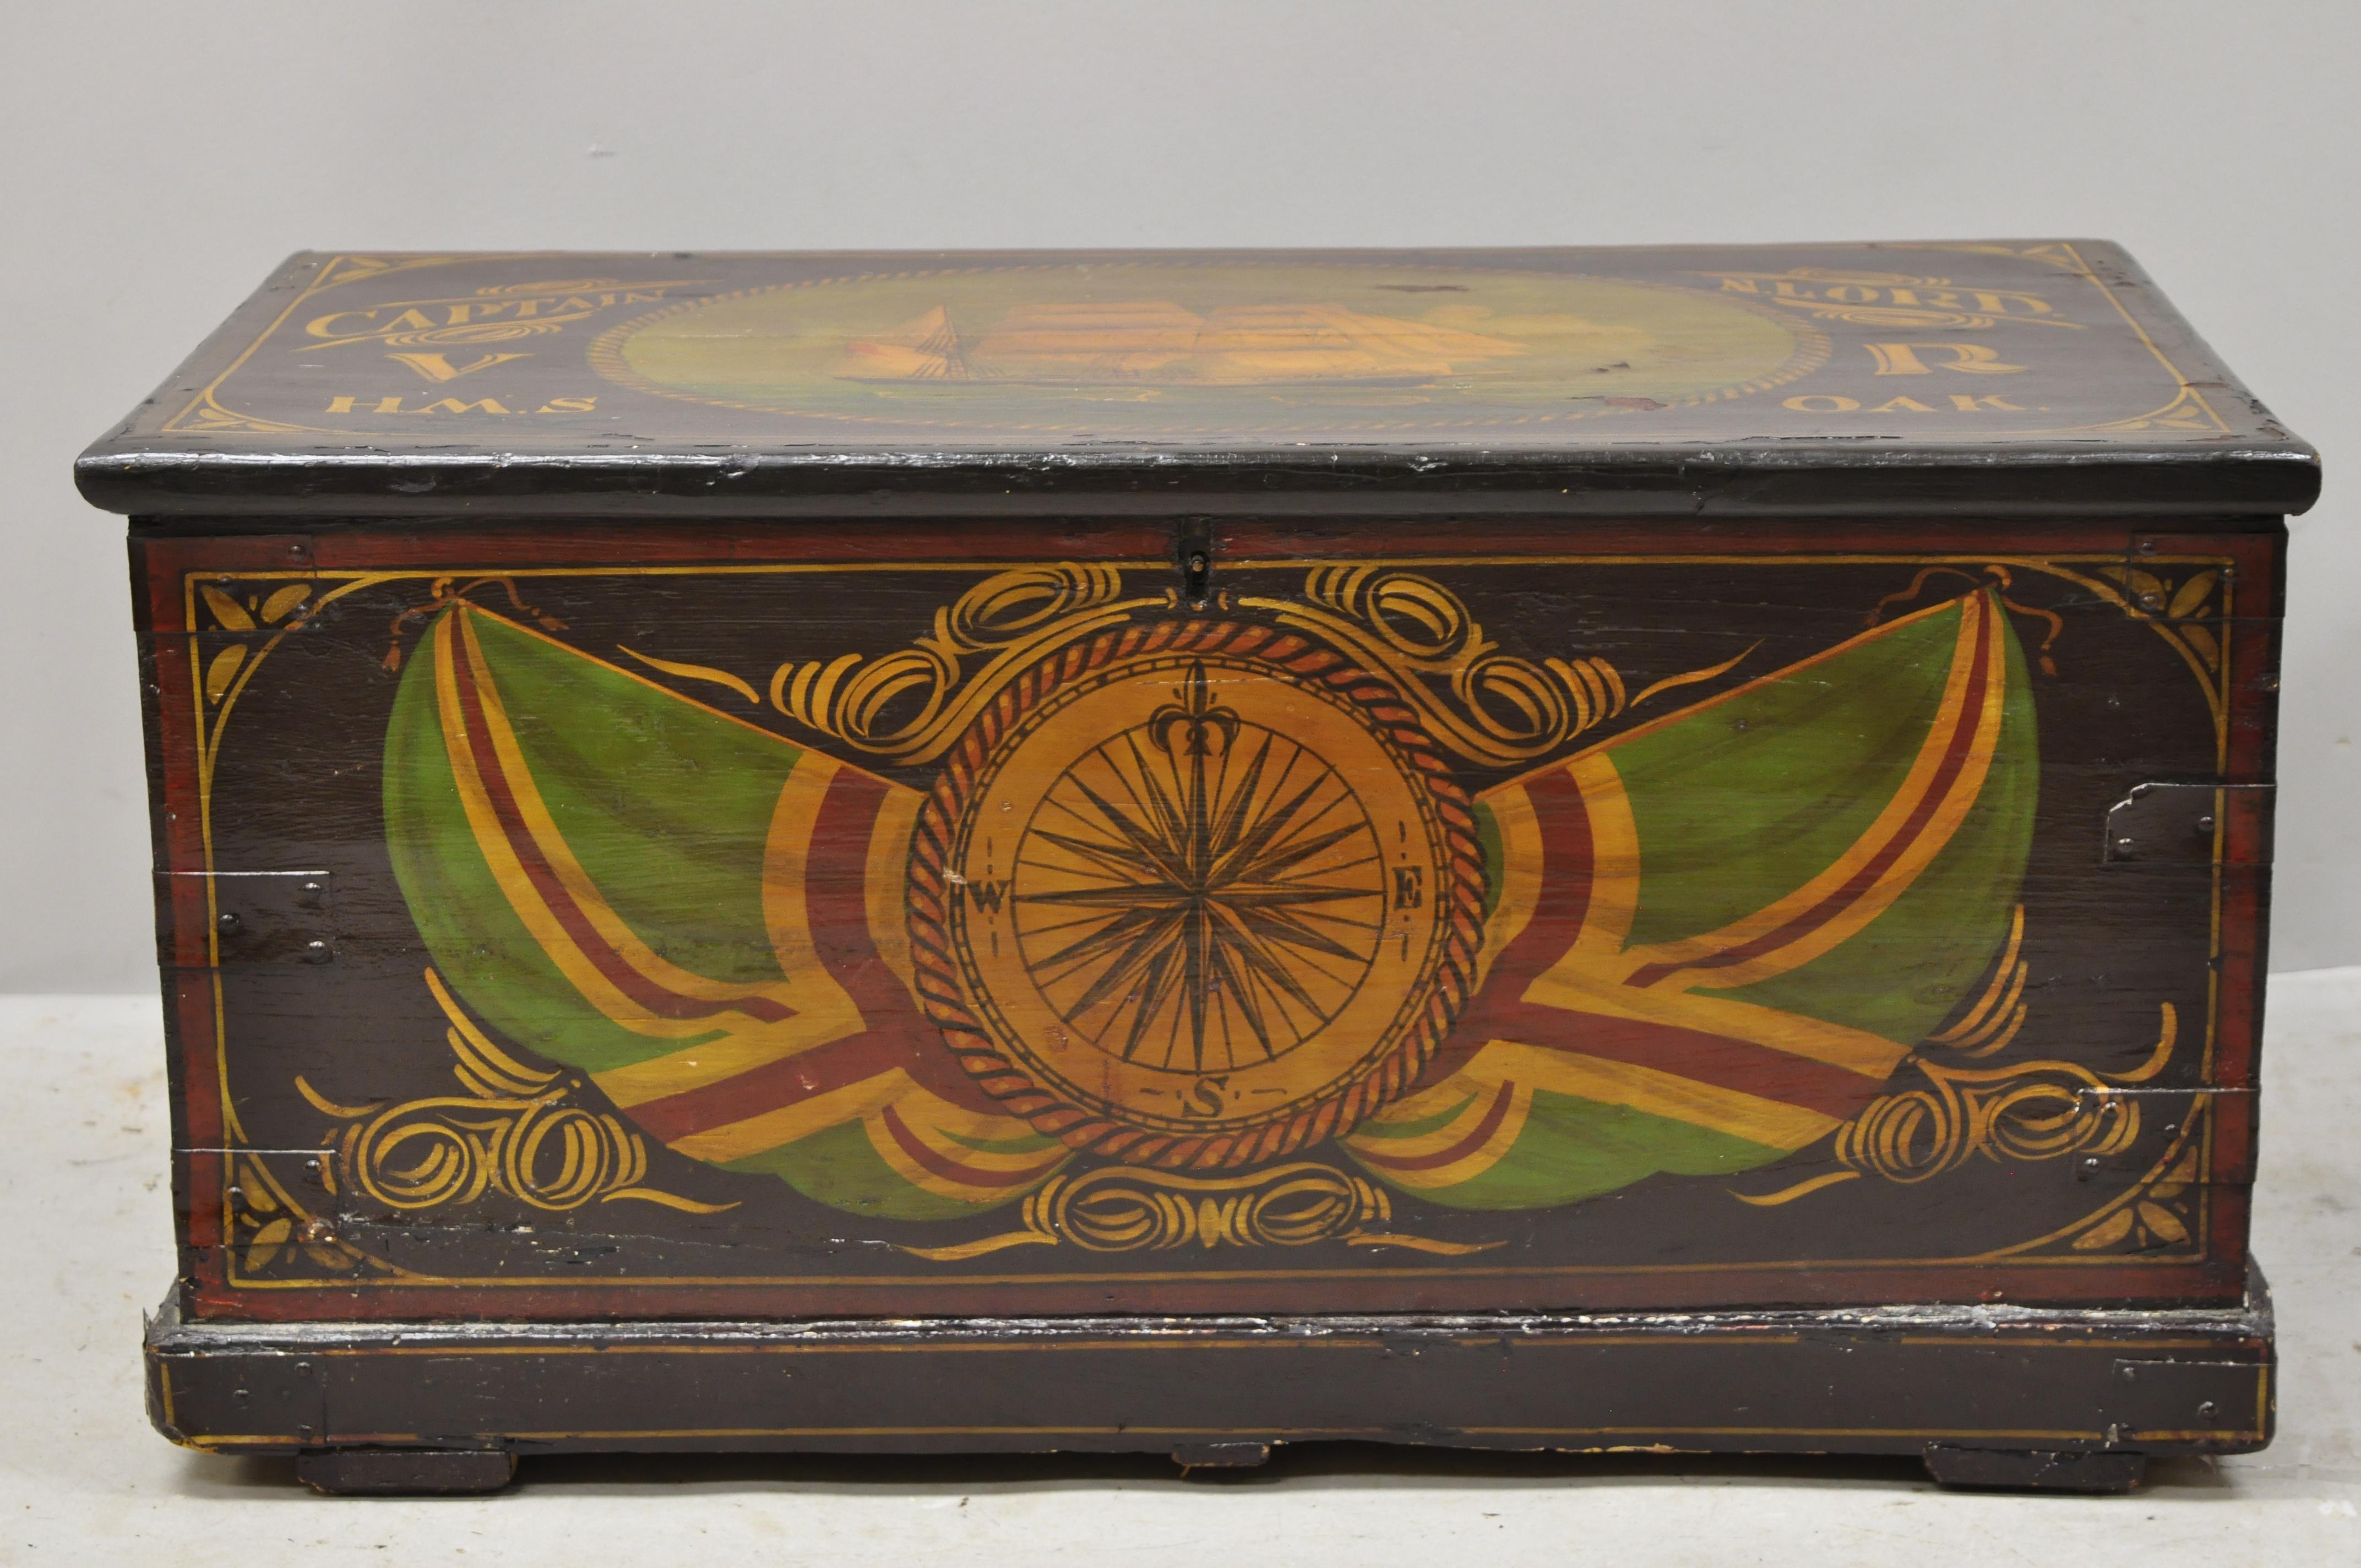 Antique English nautical captain N. Lord Clipper ship green painted blanket chest trunk. Item features hand painted details, solid wood construction, no key, but unlocked, very nice antique item, circa early 1900s. Measurements: 16.5